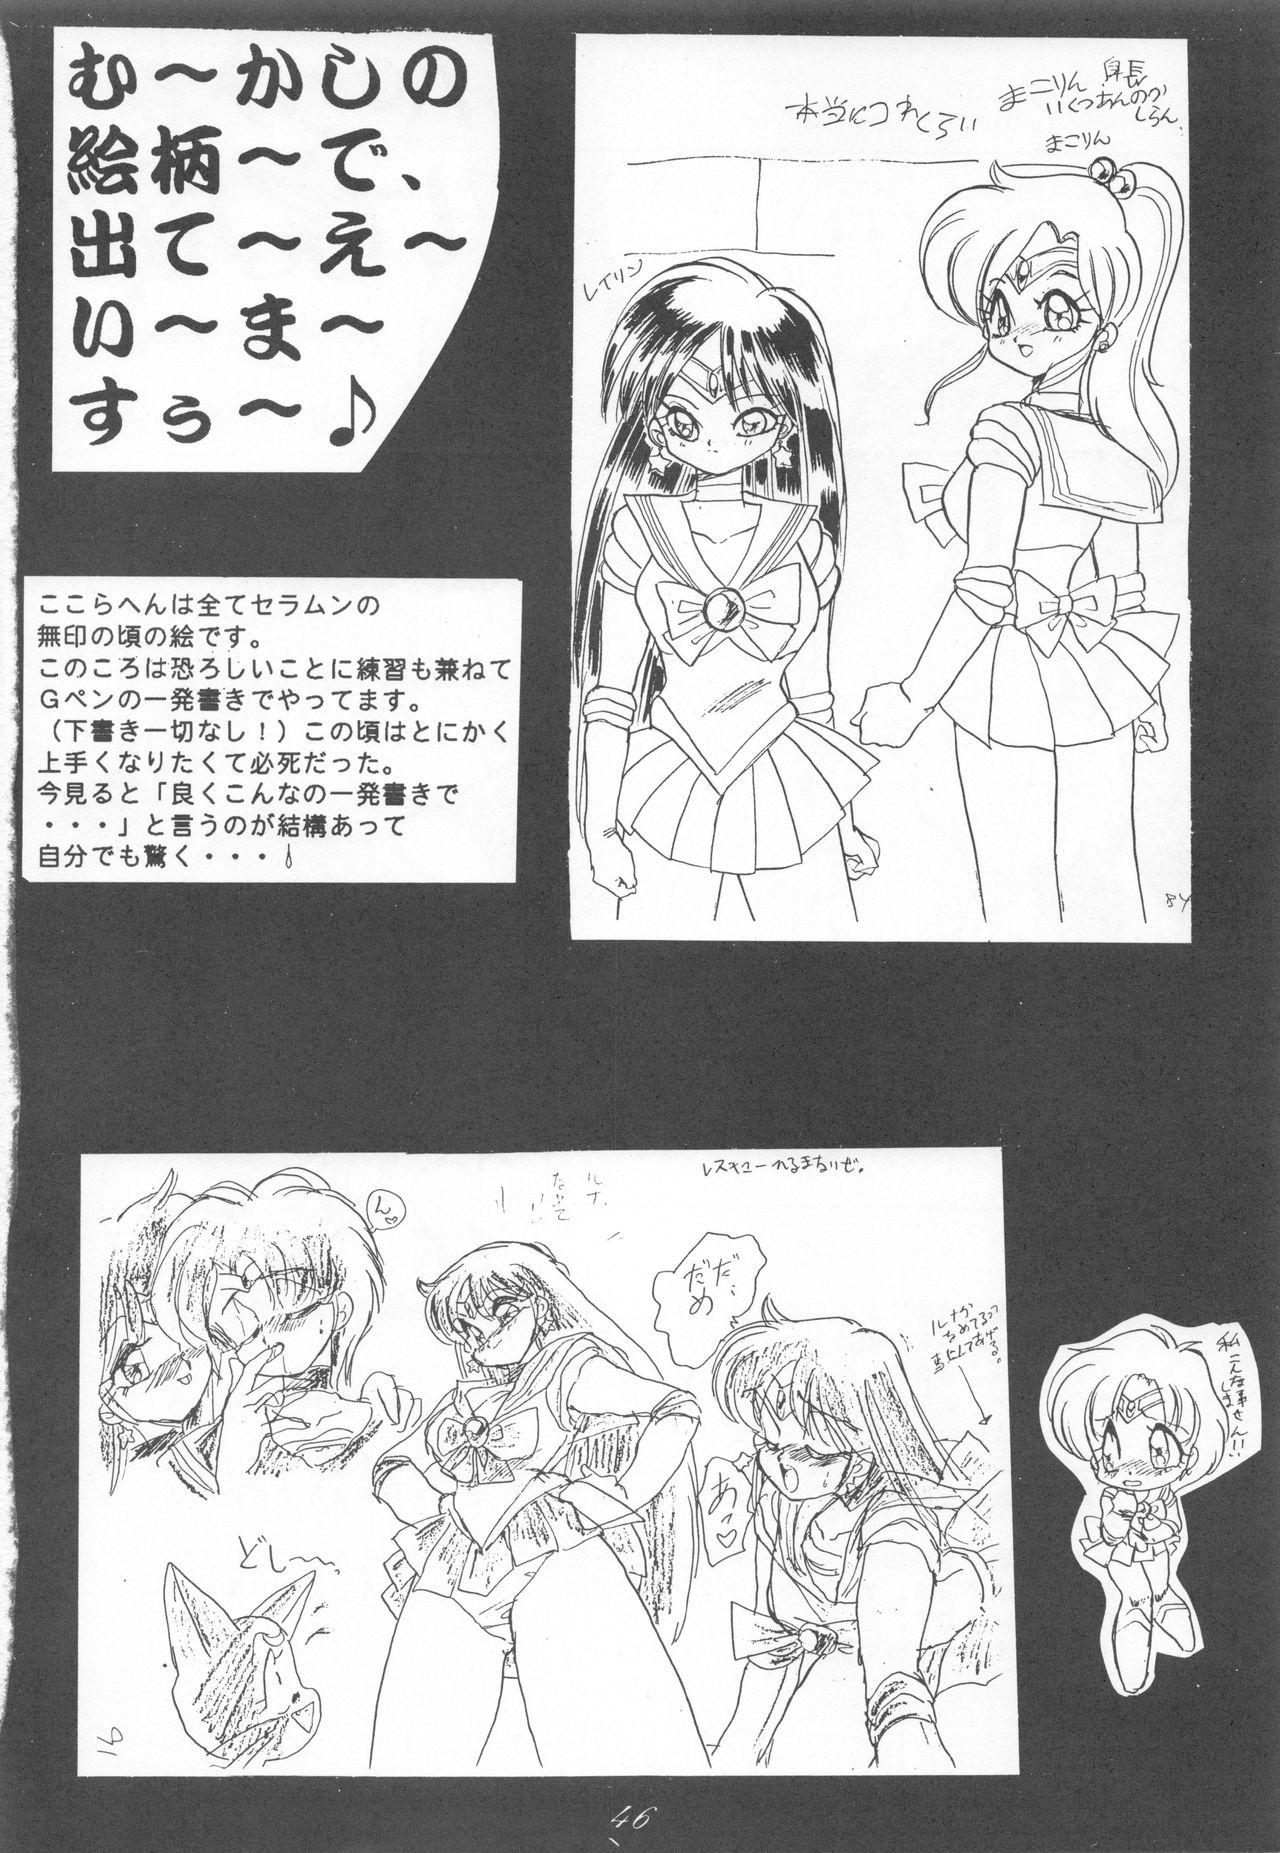 Sailor Moon 1 Page Gekijou P2 - SAILOR MOON ONE PAGE THEATER II 45